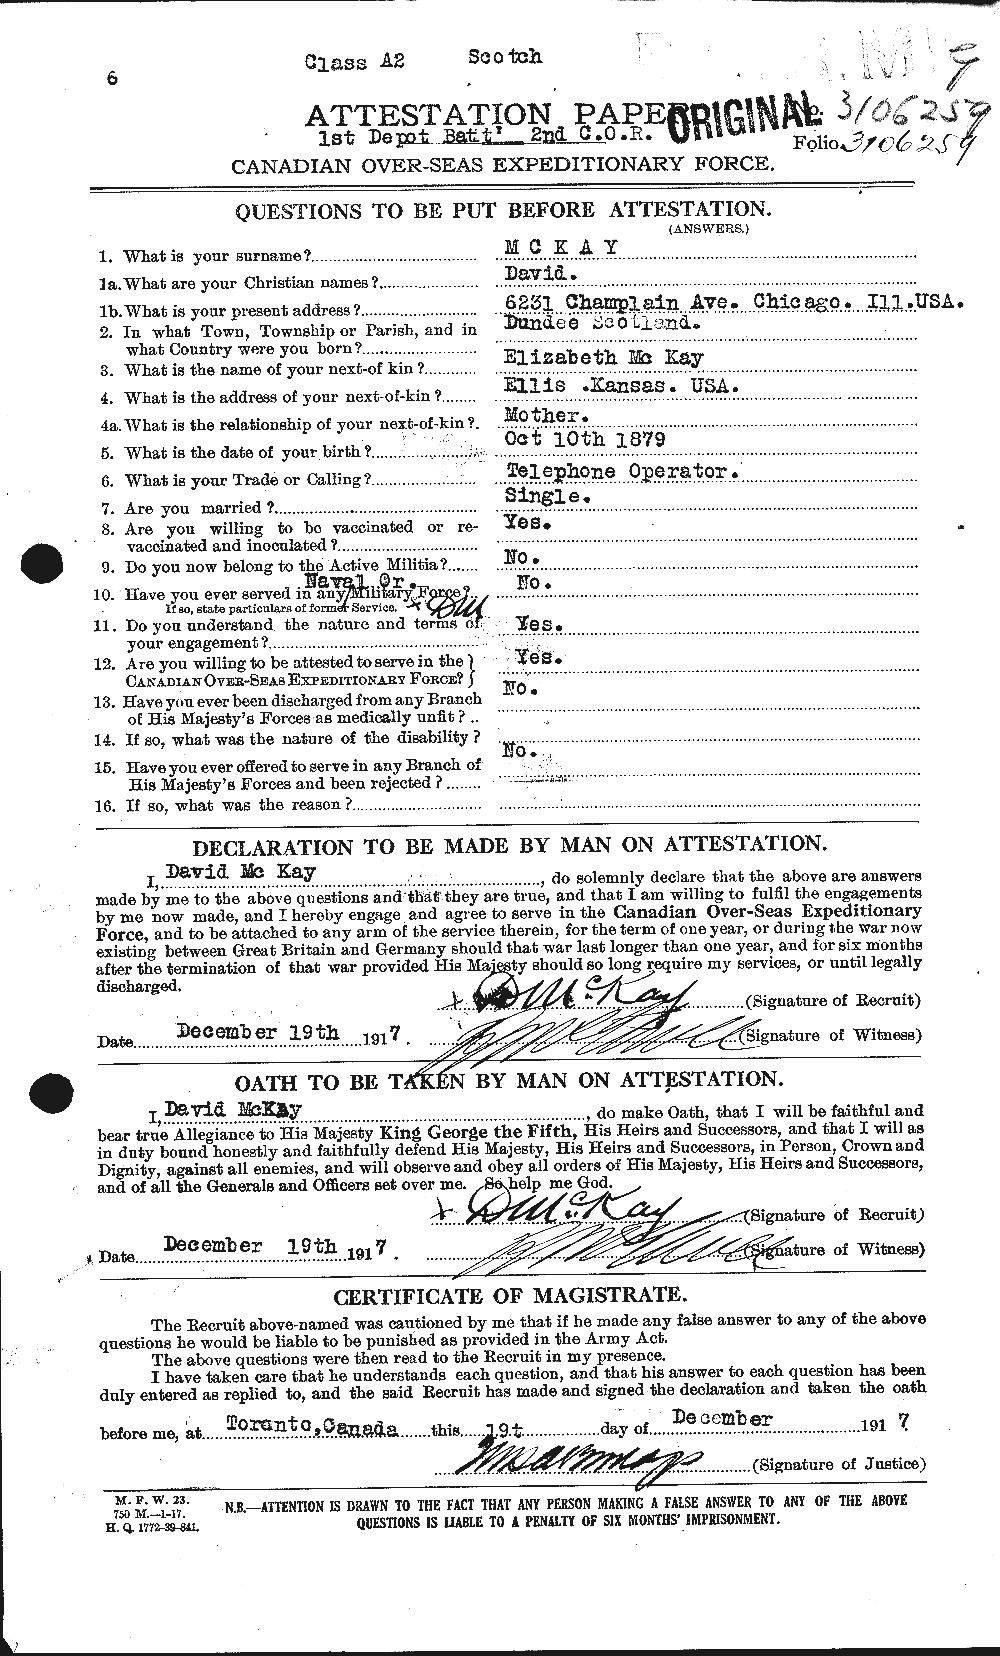 Personnel Records of the First World War - CEF 531128a